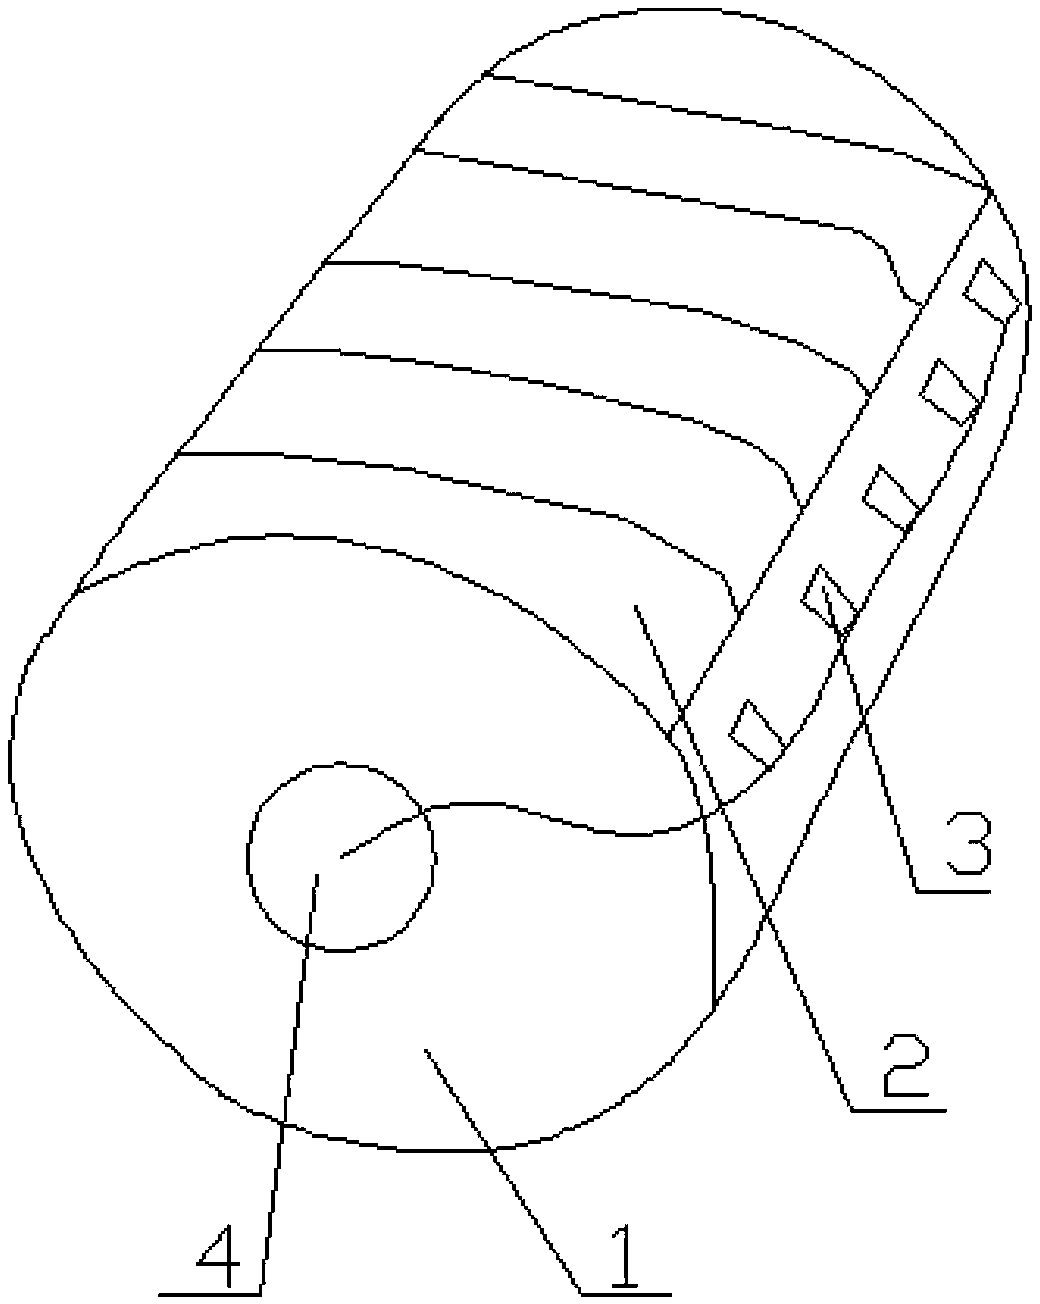 Household electrical appliance charging device